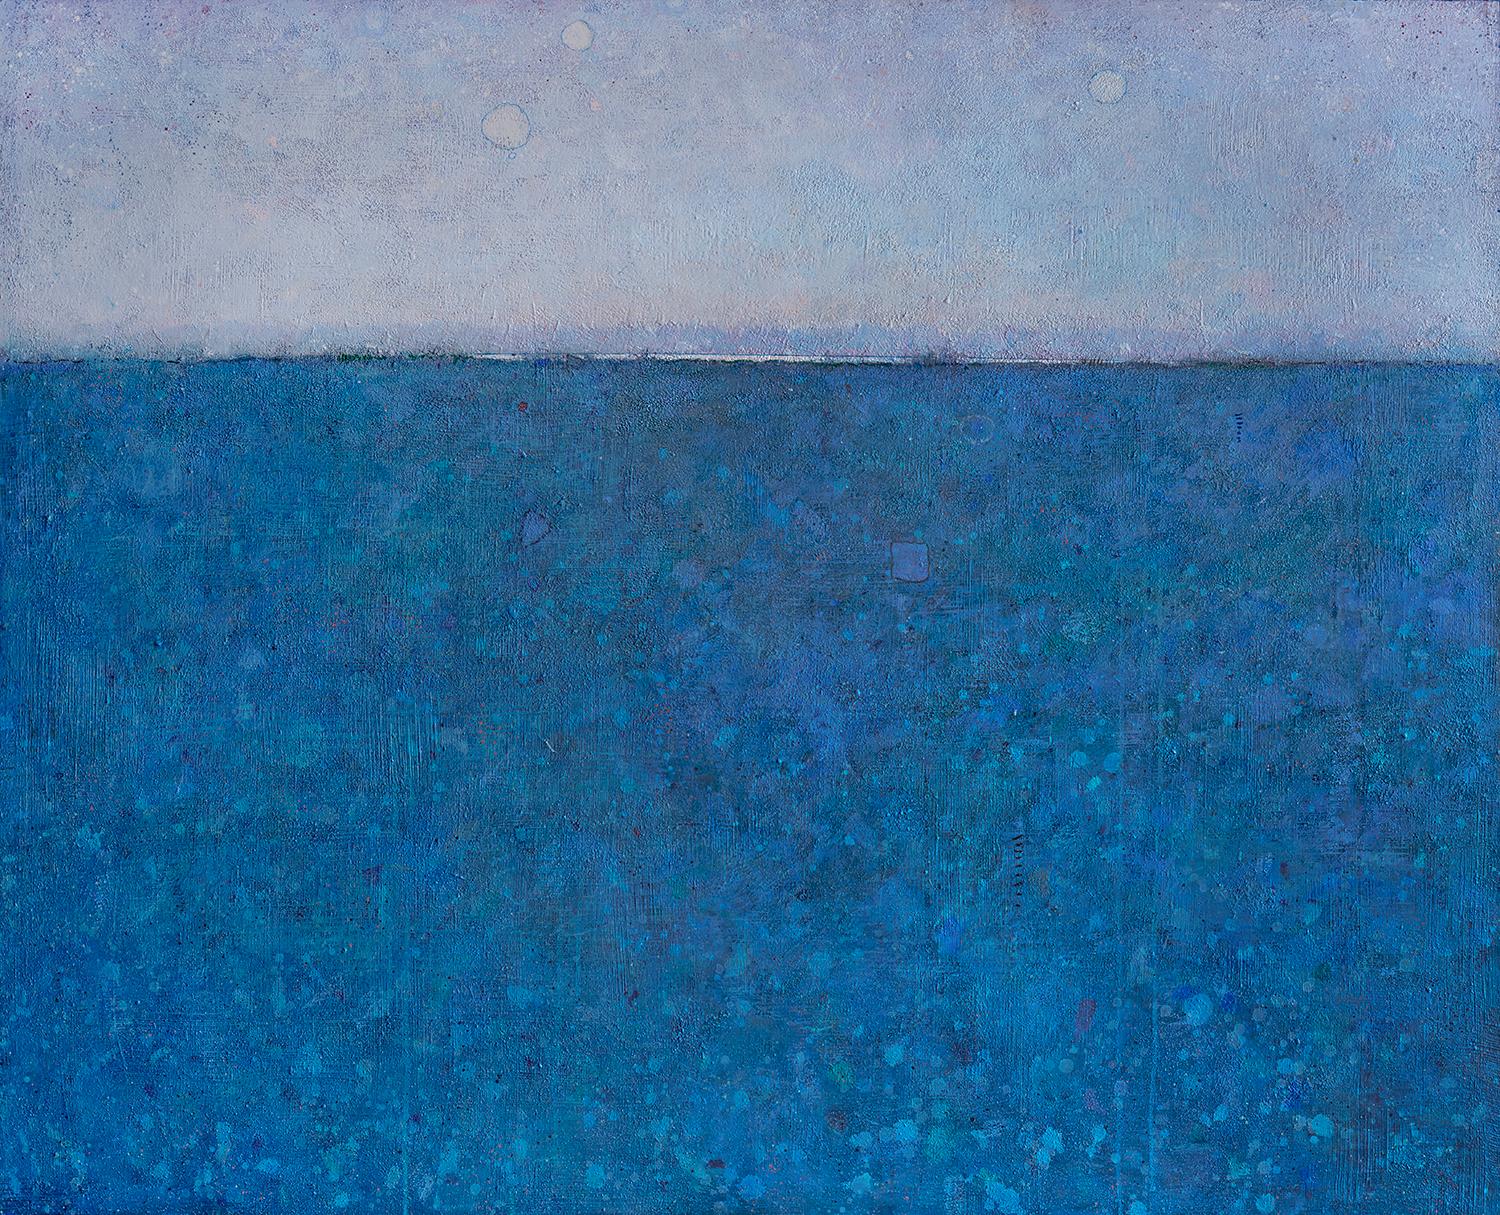 This limited edition print is an abstract landscape by Elwood Howell. In the artist's signature style, the composition is broken up by a high horizon line. A deep, vibrant blue with specs of lighter blue and teal, which creates depth beneath the